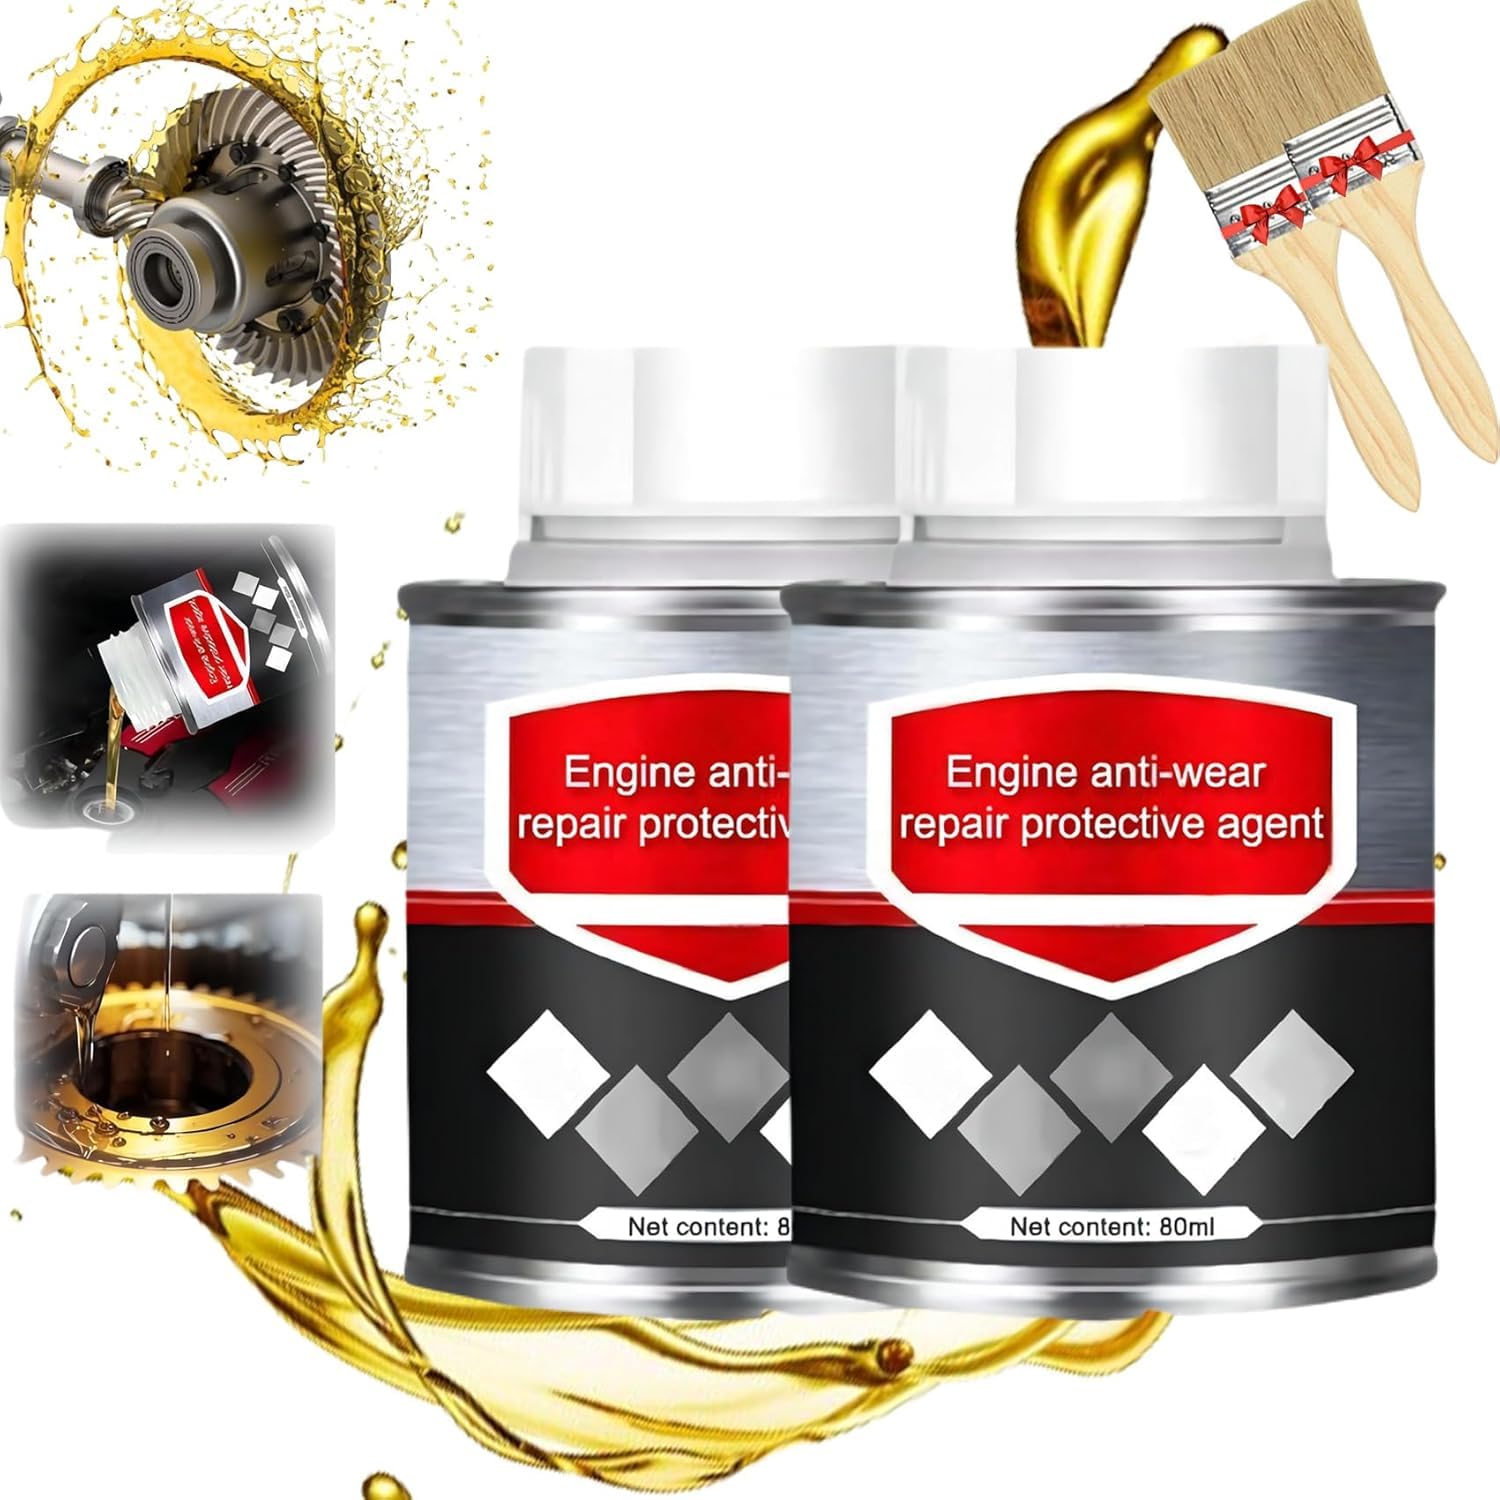 Highly Effective Engine Anti-wear Repair and Maintenance Conditioner, Engine Restorer & Lubricant, Agent Noise Reduction and Shaking Cure Oil Burning Additive (2pcs) von Qklovni